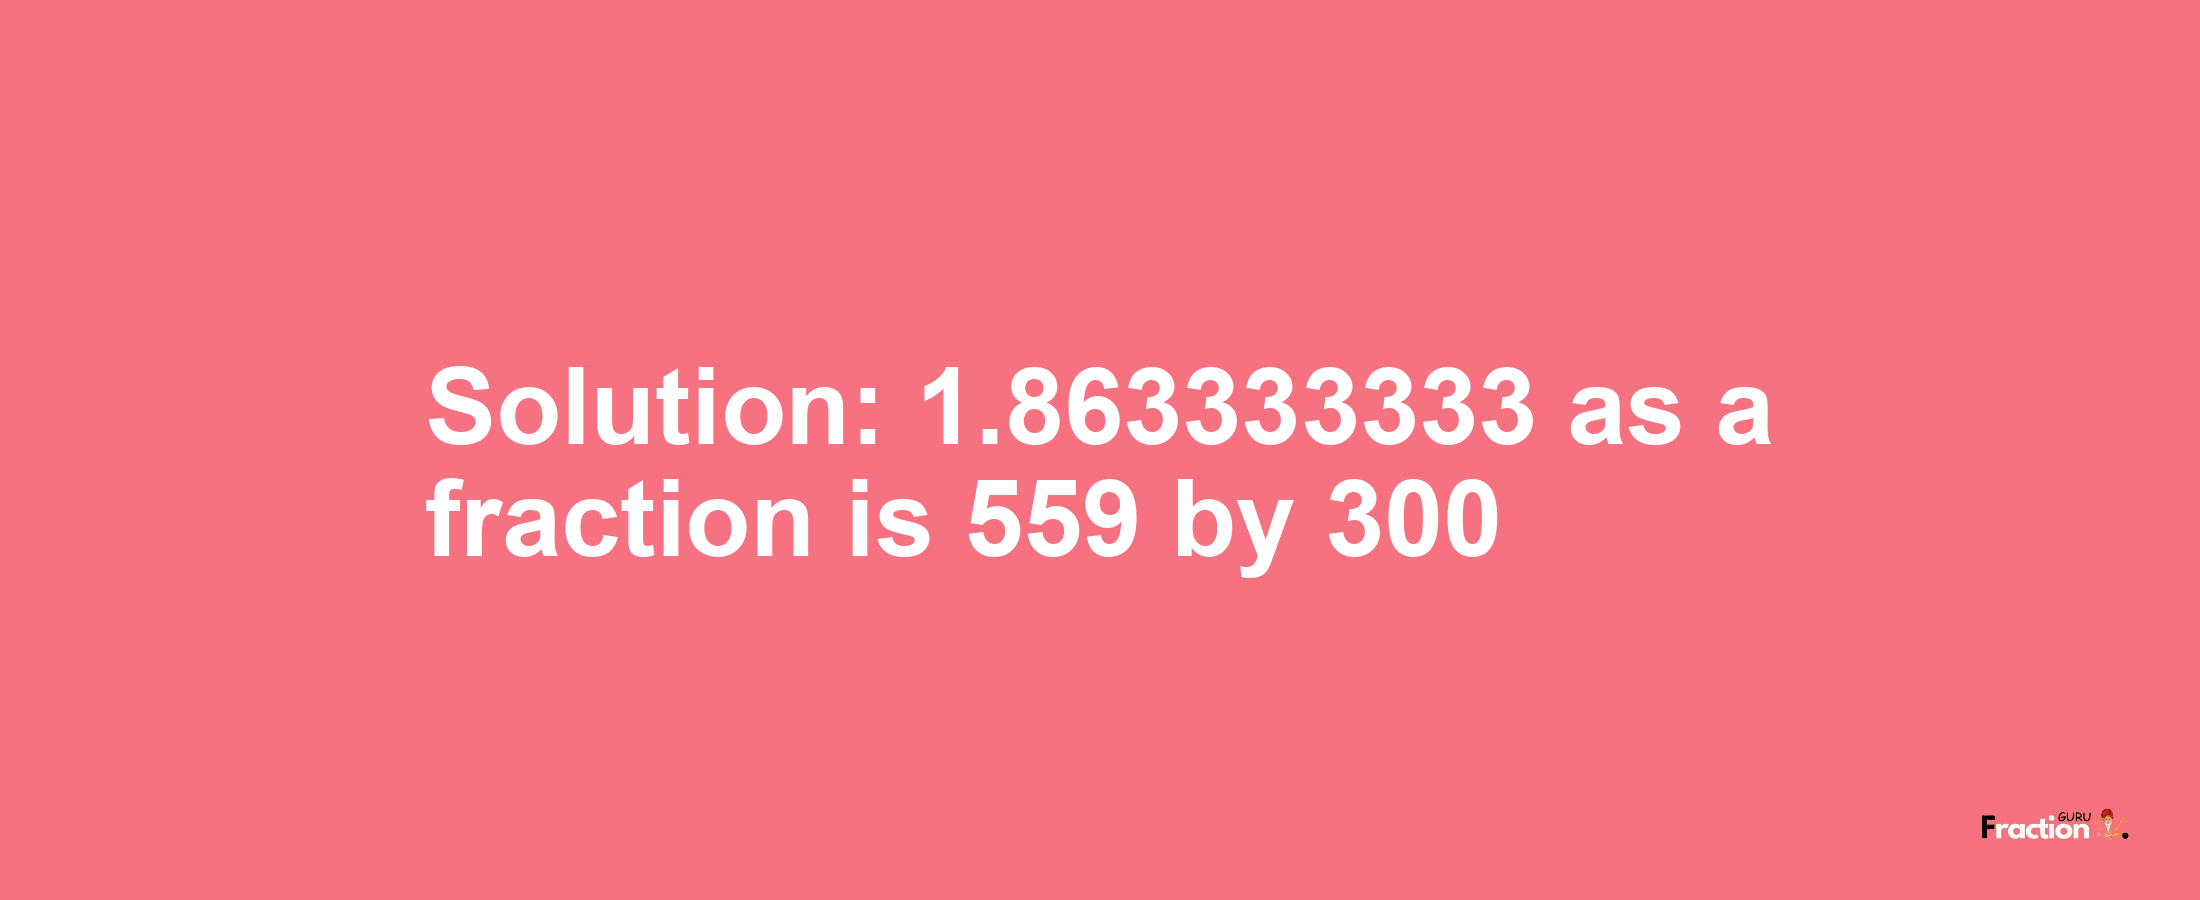 Solution:1.863333333 as a fraction is 559/300